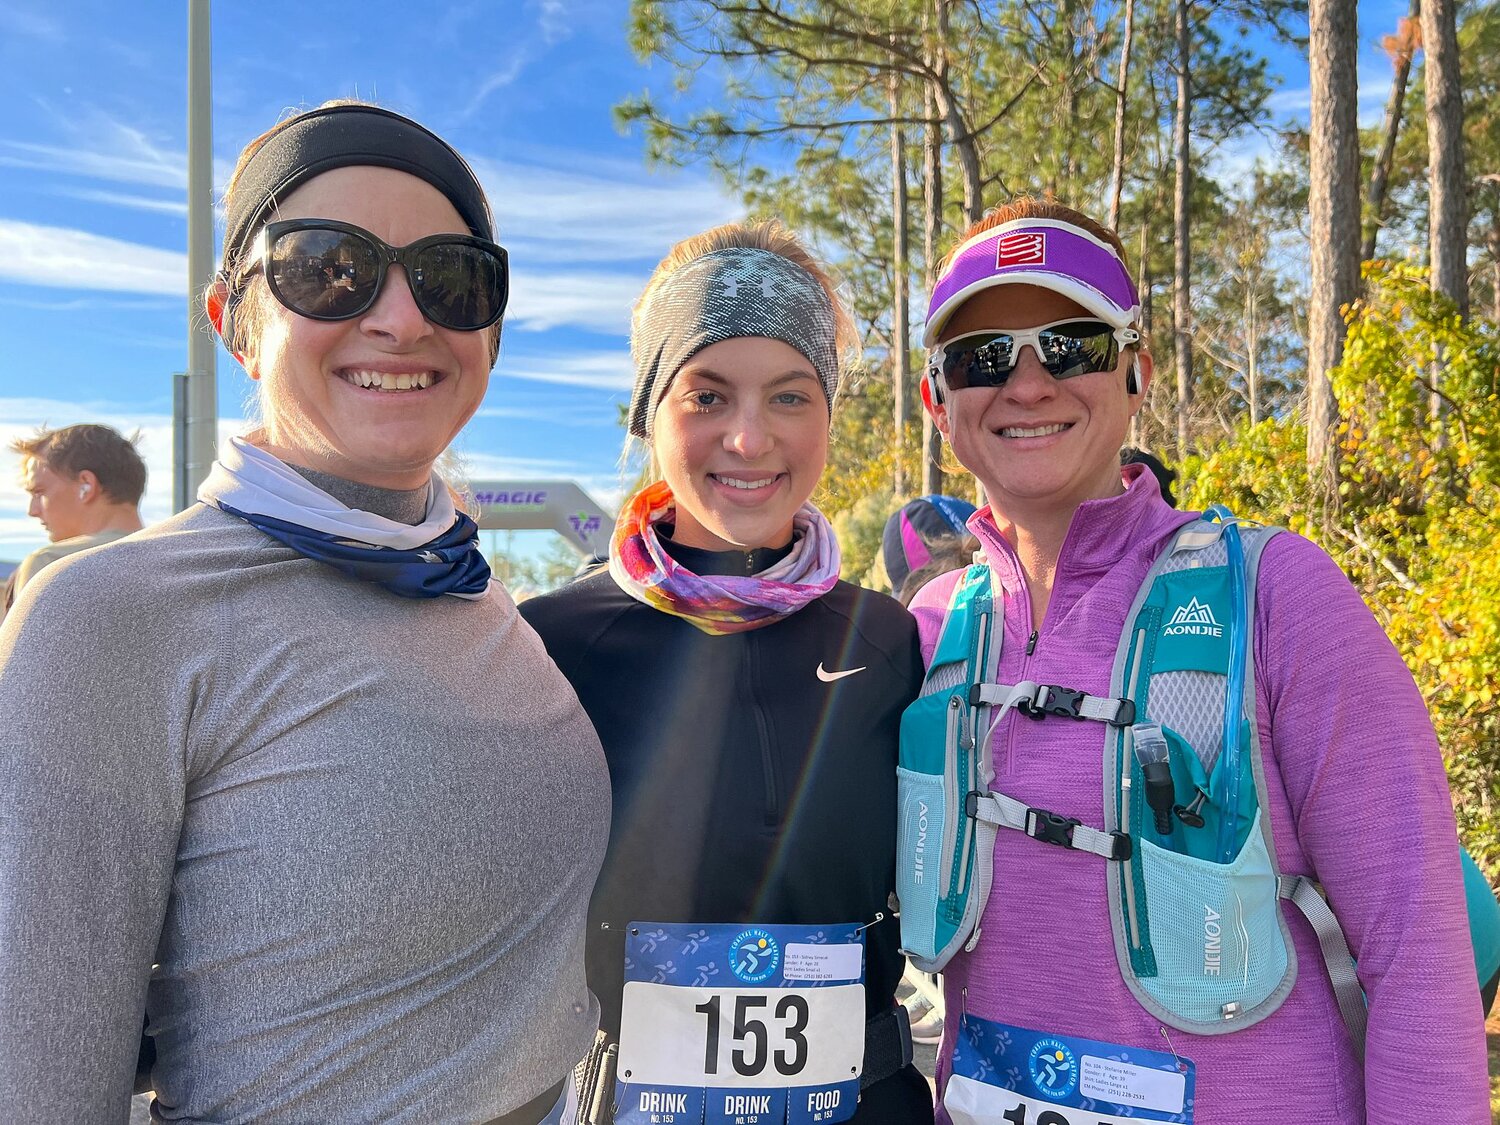 Drive-thru packet pick-up for the 2023 Coastal Half Marathon, 5K and 1-Mile Fun Run will take place on Friday, Nov. 24, from 3-5 p.m. and walk-up on race day from 6:30-7:30 a.m. at the Orange Beach Sportsplex.